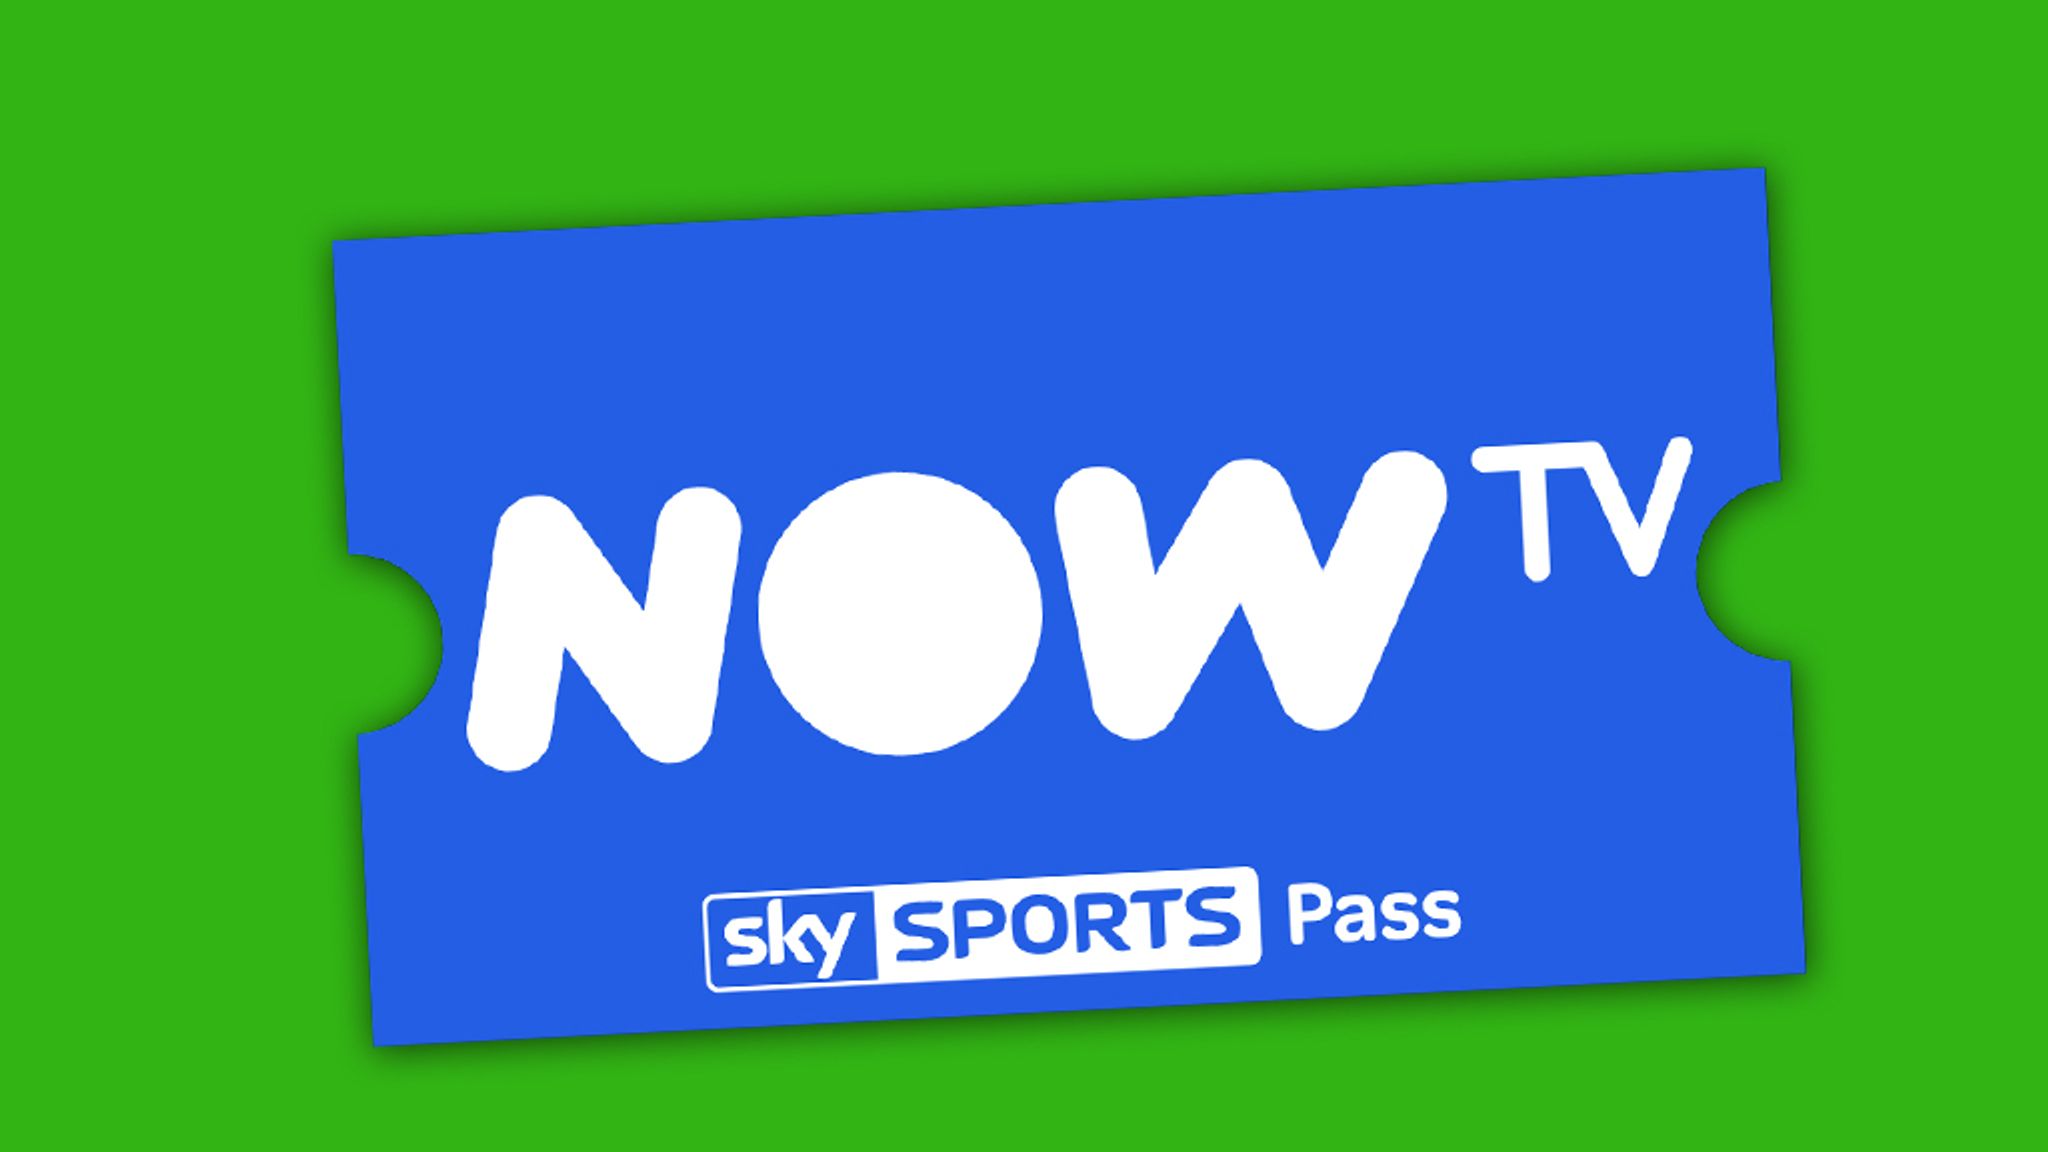 now tv sports pass offer